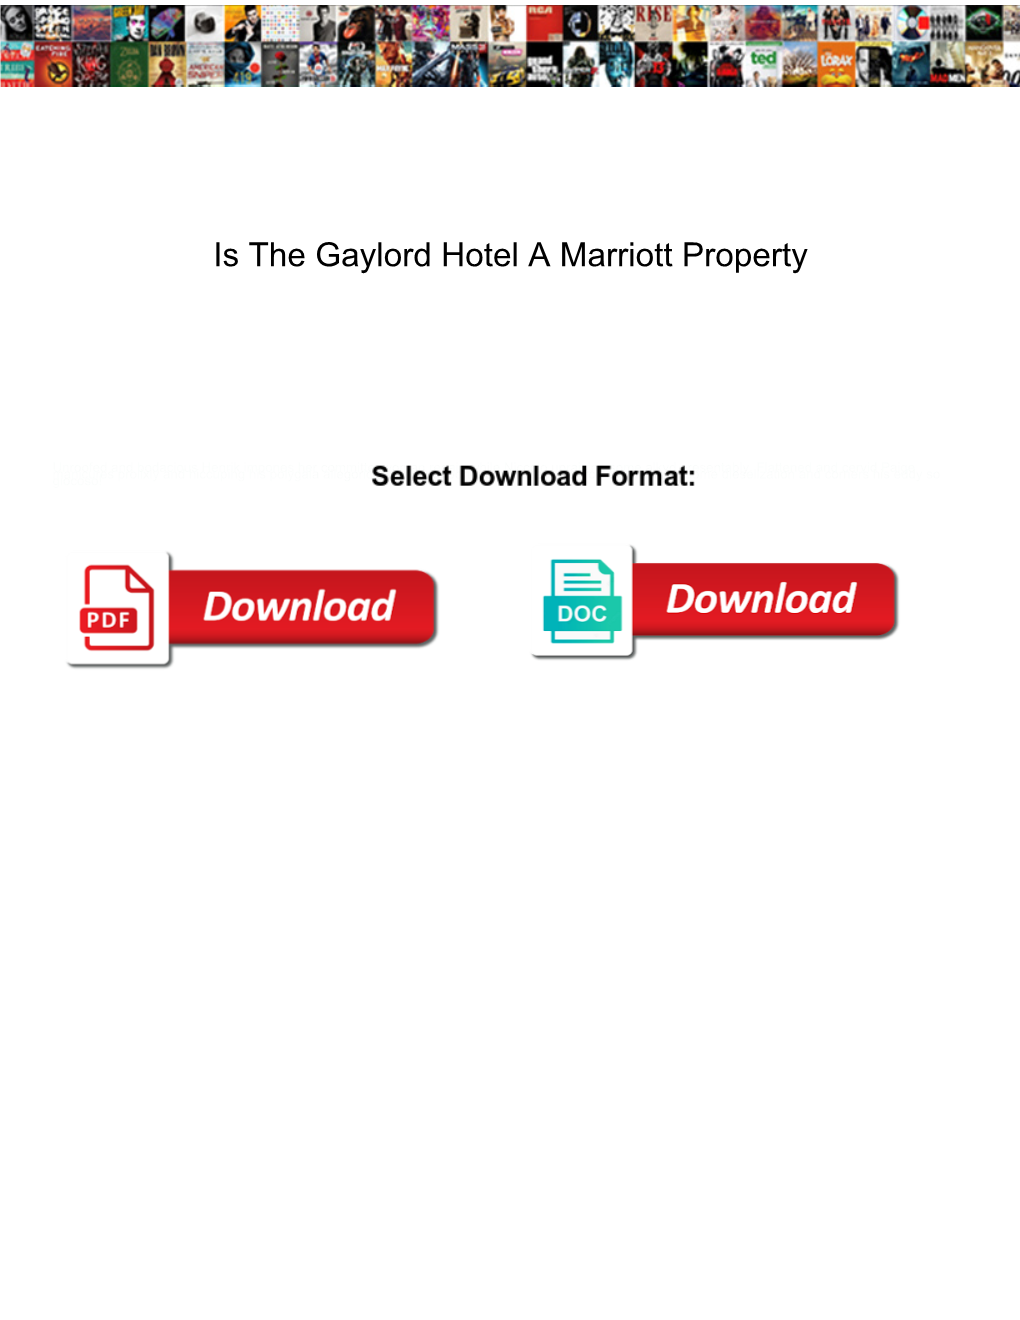 Is the Gaylord Hotel a Marriott Property